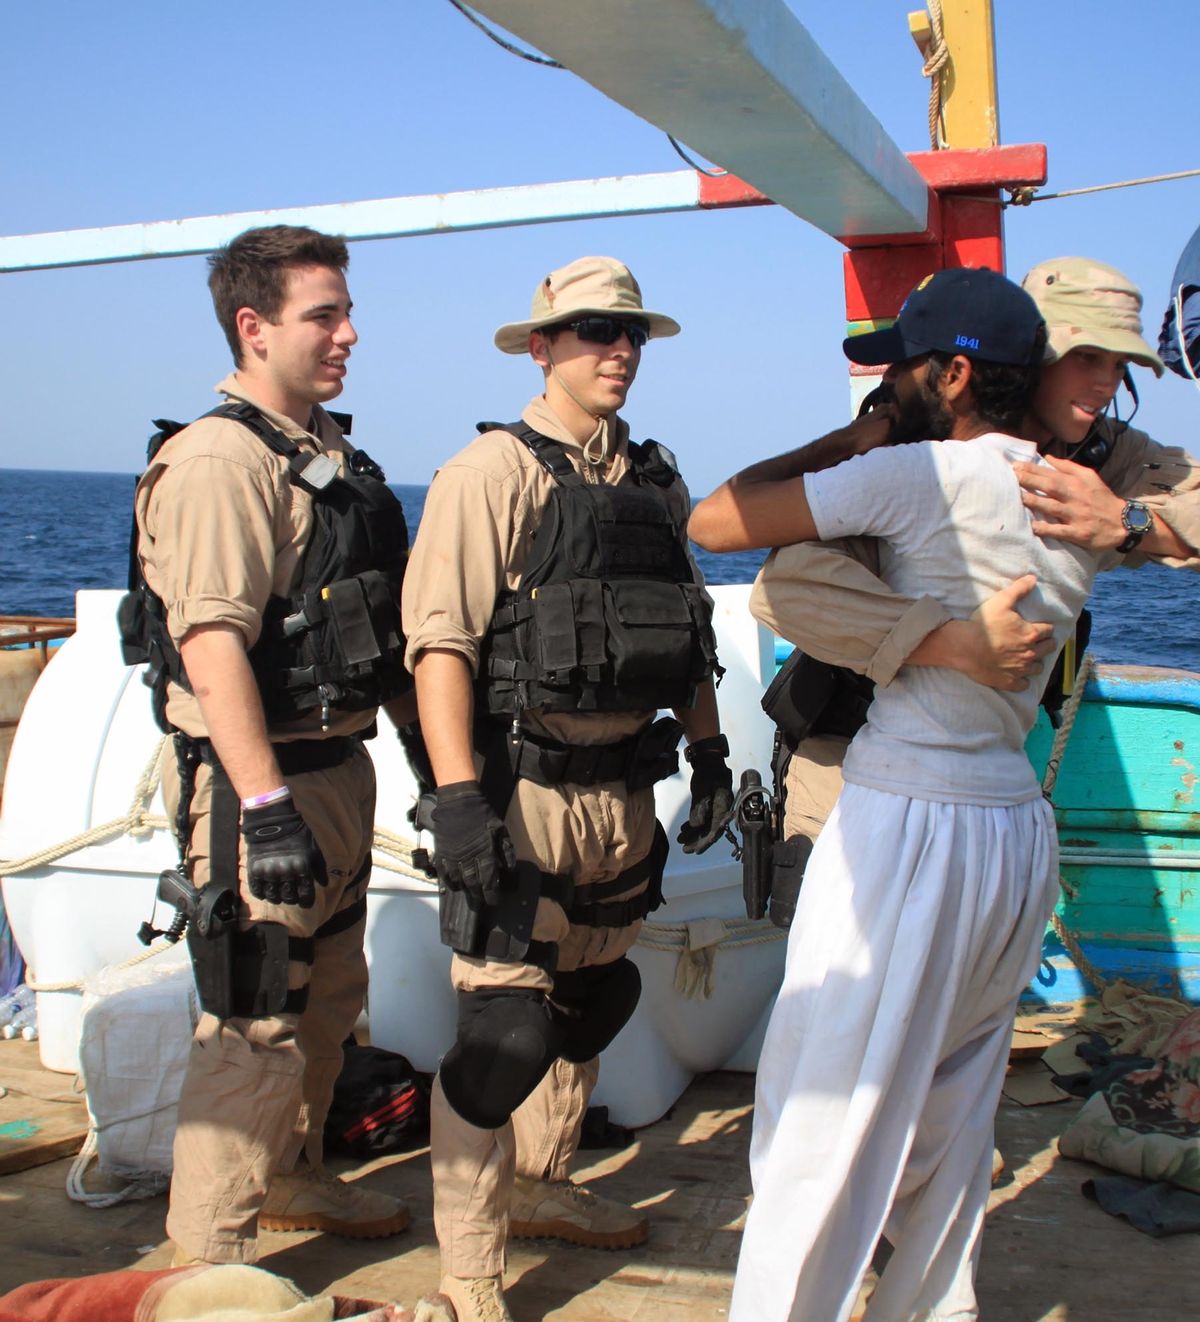 Navy sailors assigned to the guided-missile destroyer USS Kidd greet a crew member of the Iranian fishing vessel the Al Molai on Friday in the Arabian Sea. (Associated Press)